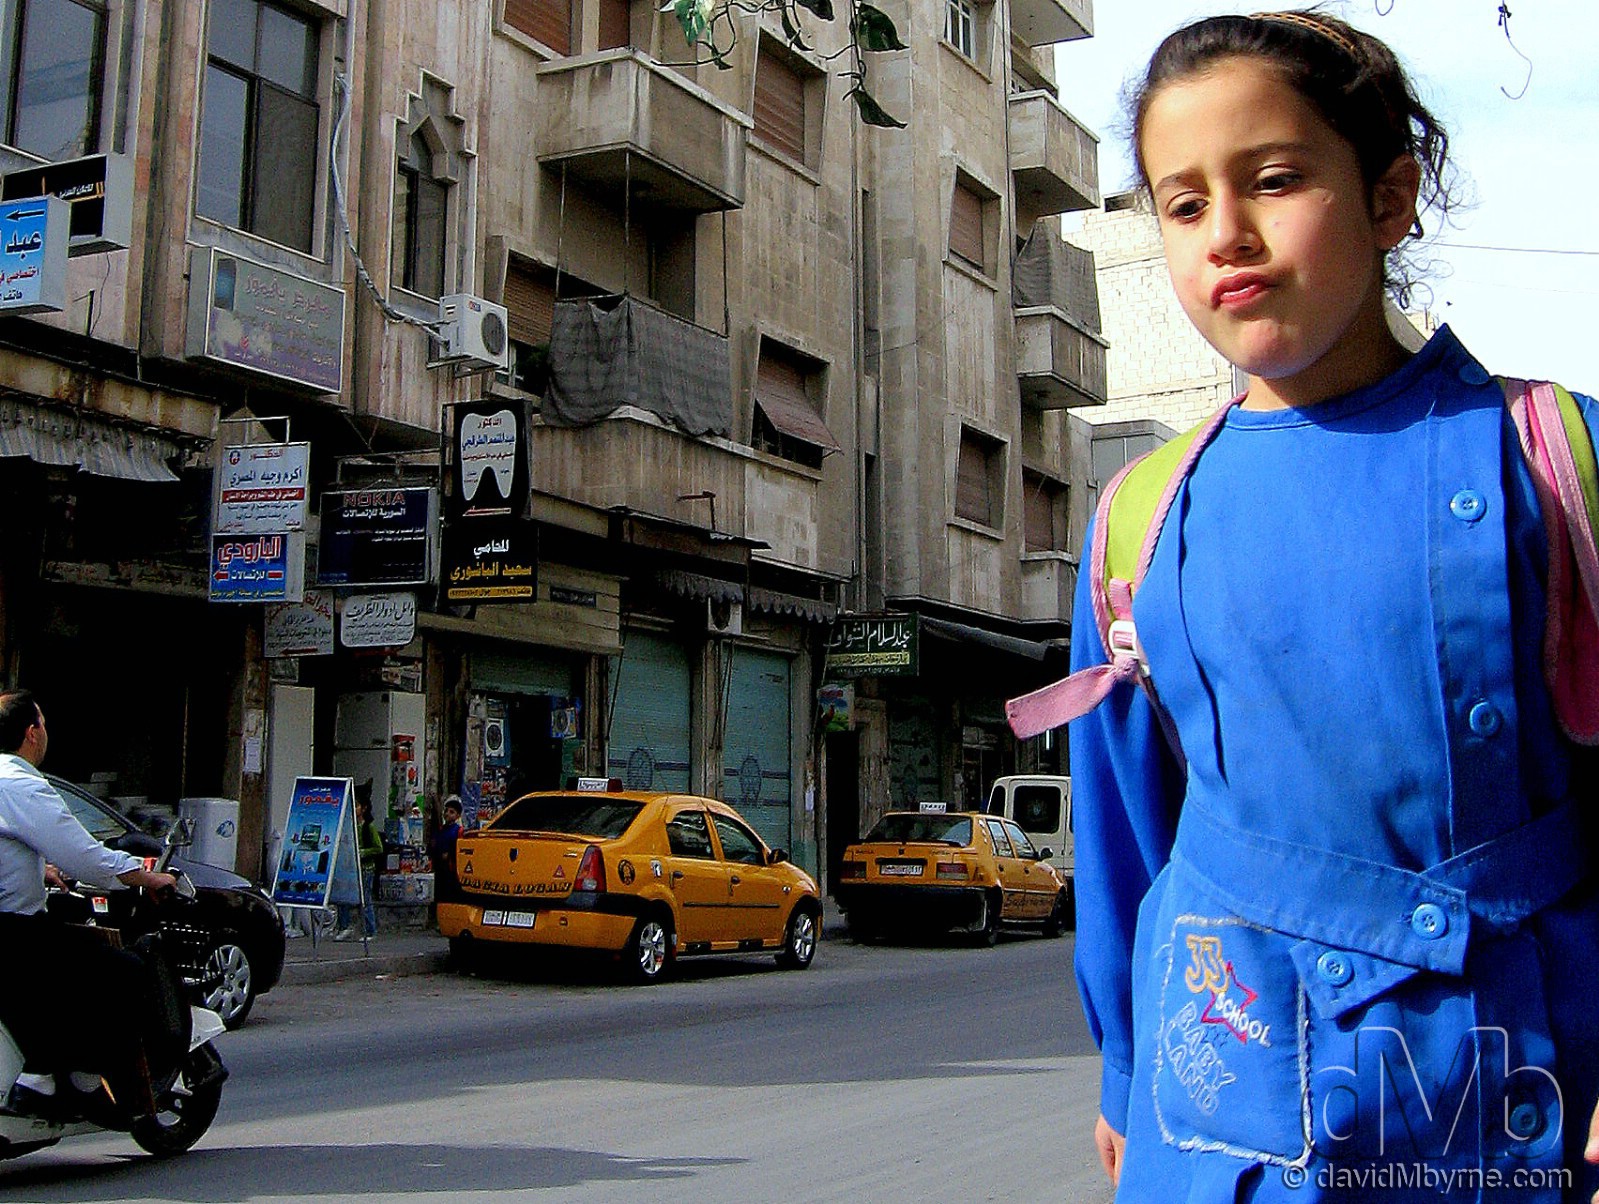 On the streets of Hama, Syria. May 7th, 2008.